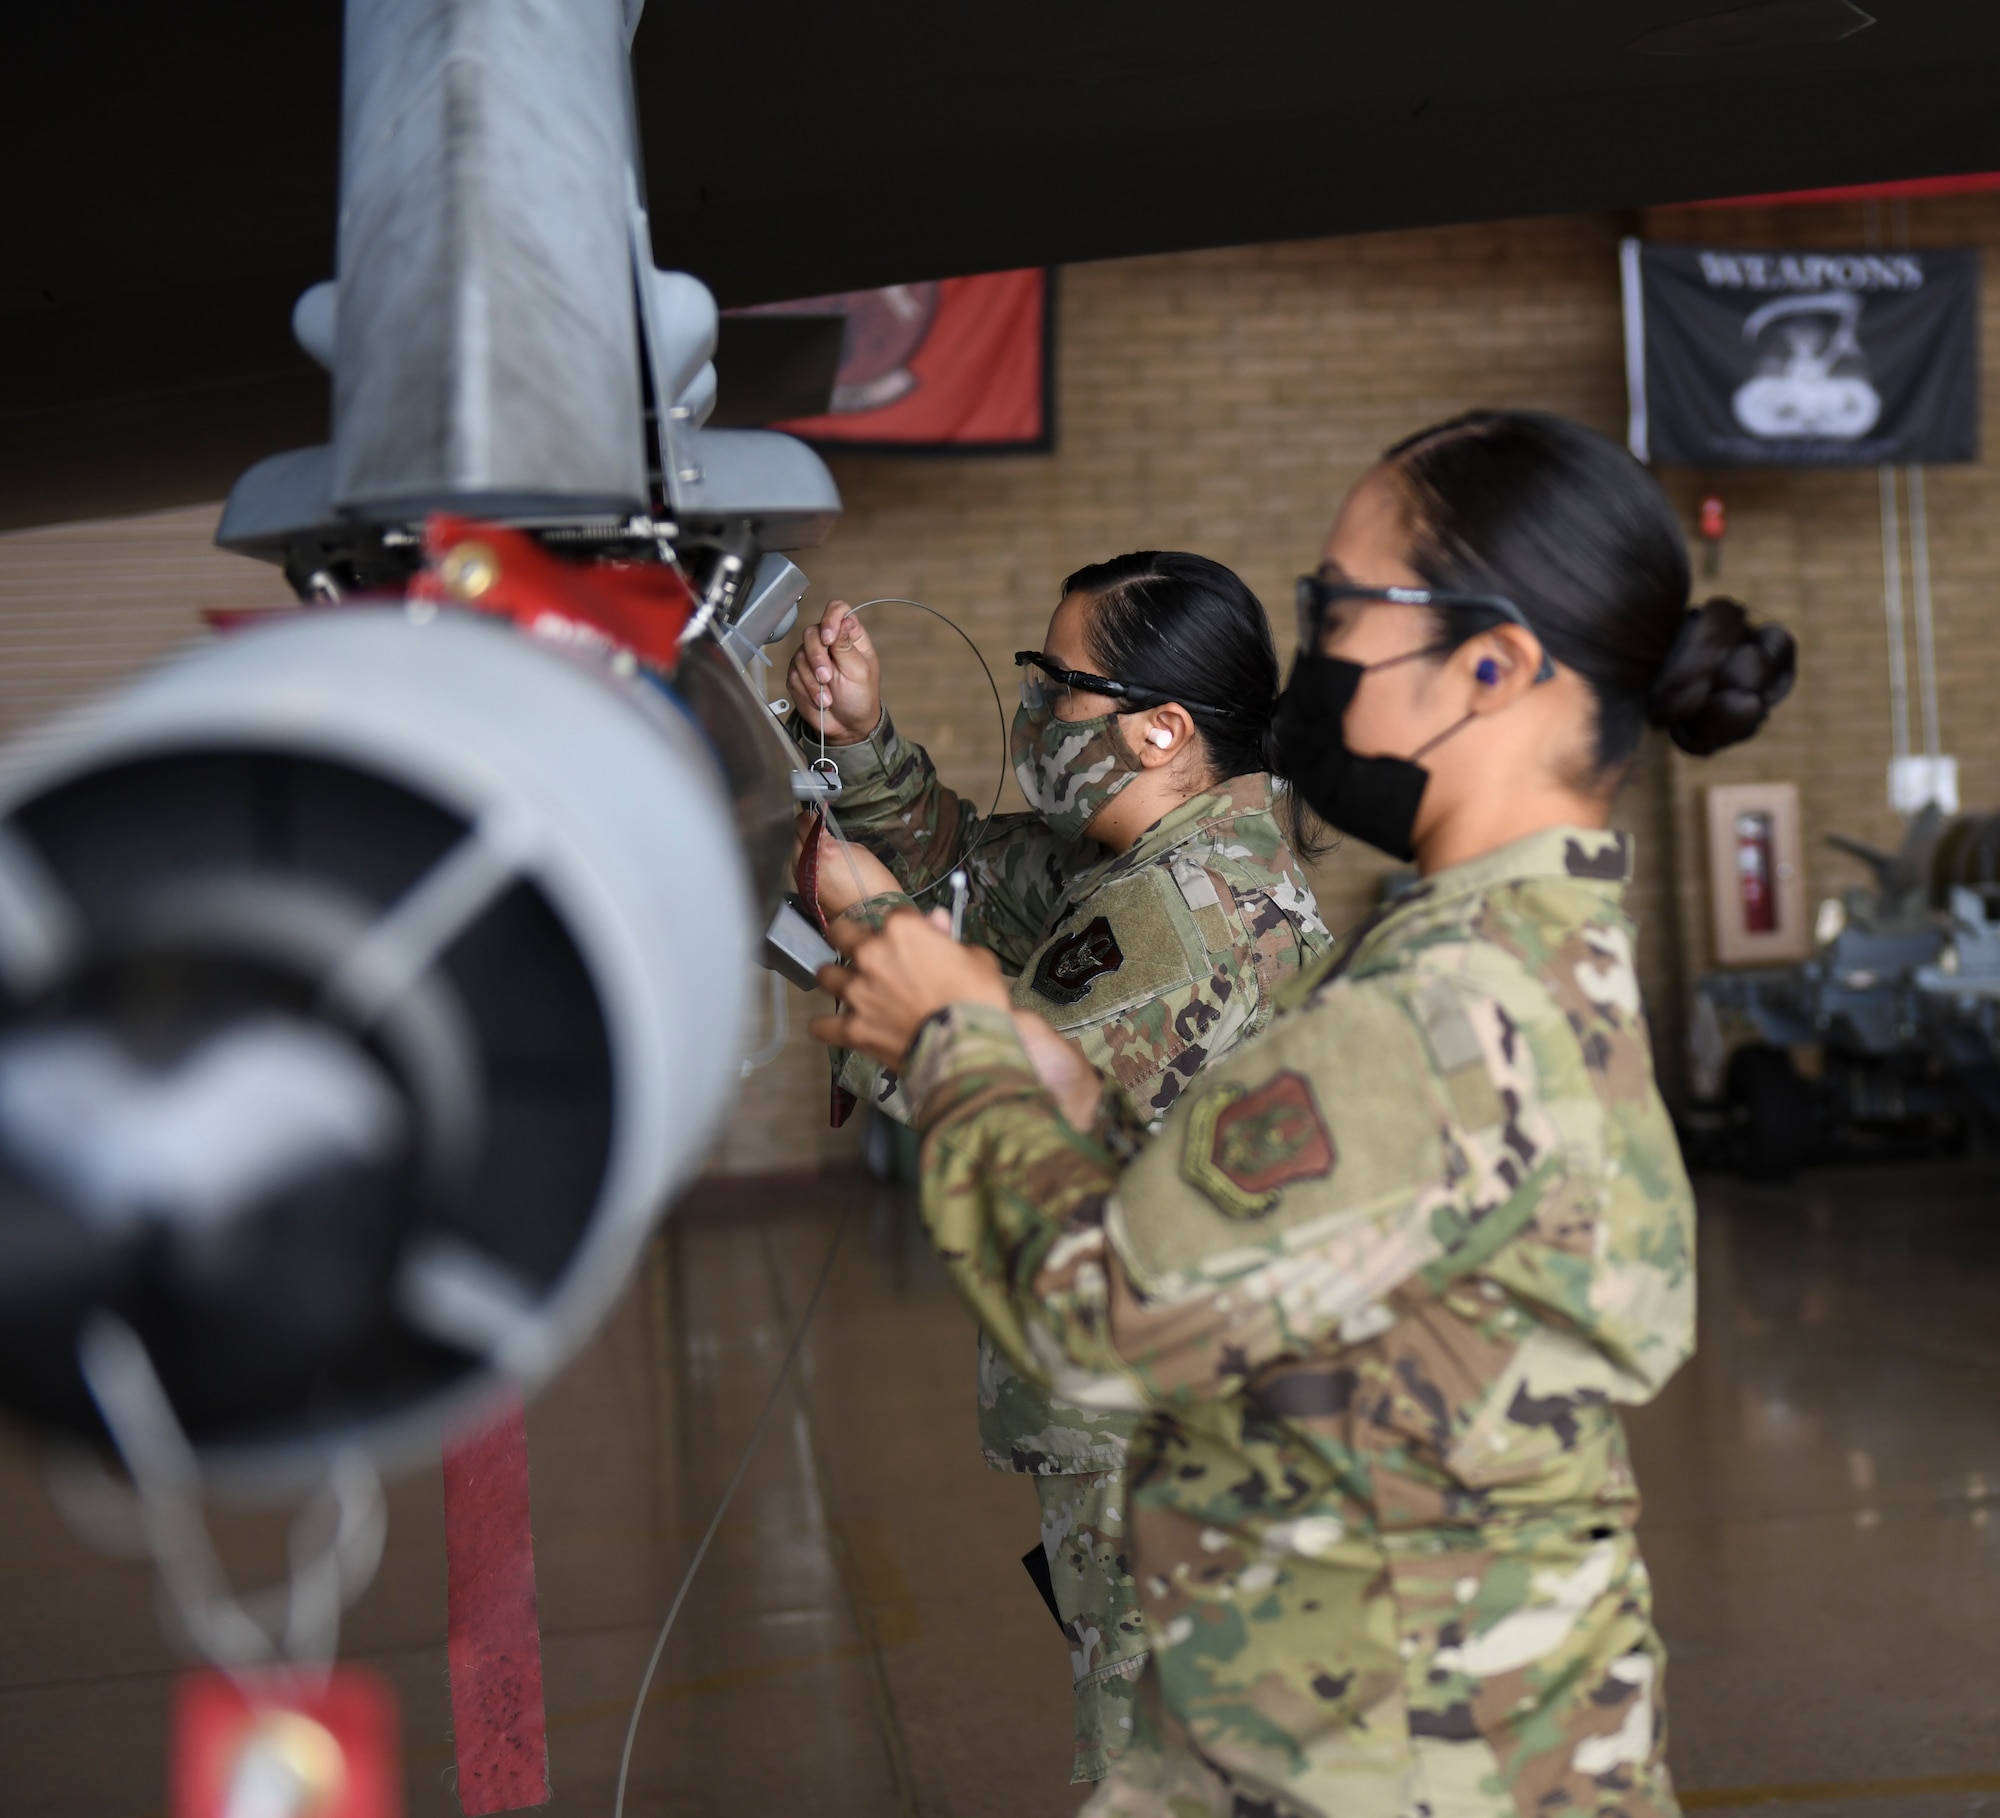 Tech. Sgt. Joyce Osornio-Magaña, front, 944th Fighter Wing weapons load technician, and Senior Airman Jocelyn Zavala, 62nd Aircraft Maintenance Unit weapons load technician, participate in a Women of Weapons Exhibition Load March 25, 2021, at Luke Air Force Base, Arizona. The exhibition load involved three teams made up of all women from different backgrounds, units, and ranks, honoring female maintainers for Women’s History Month. Diversity allows the Air Force to capitalize on all available talent by enabling a culture of inclusion. (U.S. Air Force photo by Staff Sgt. Amber Carter)